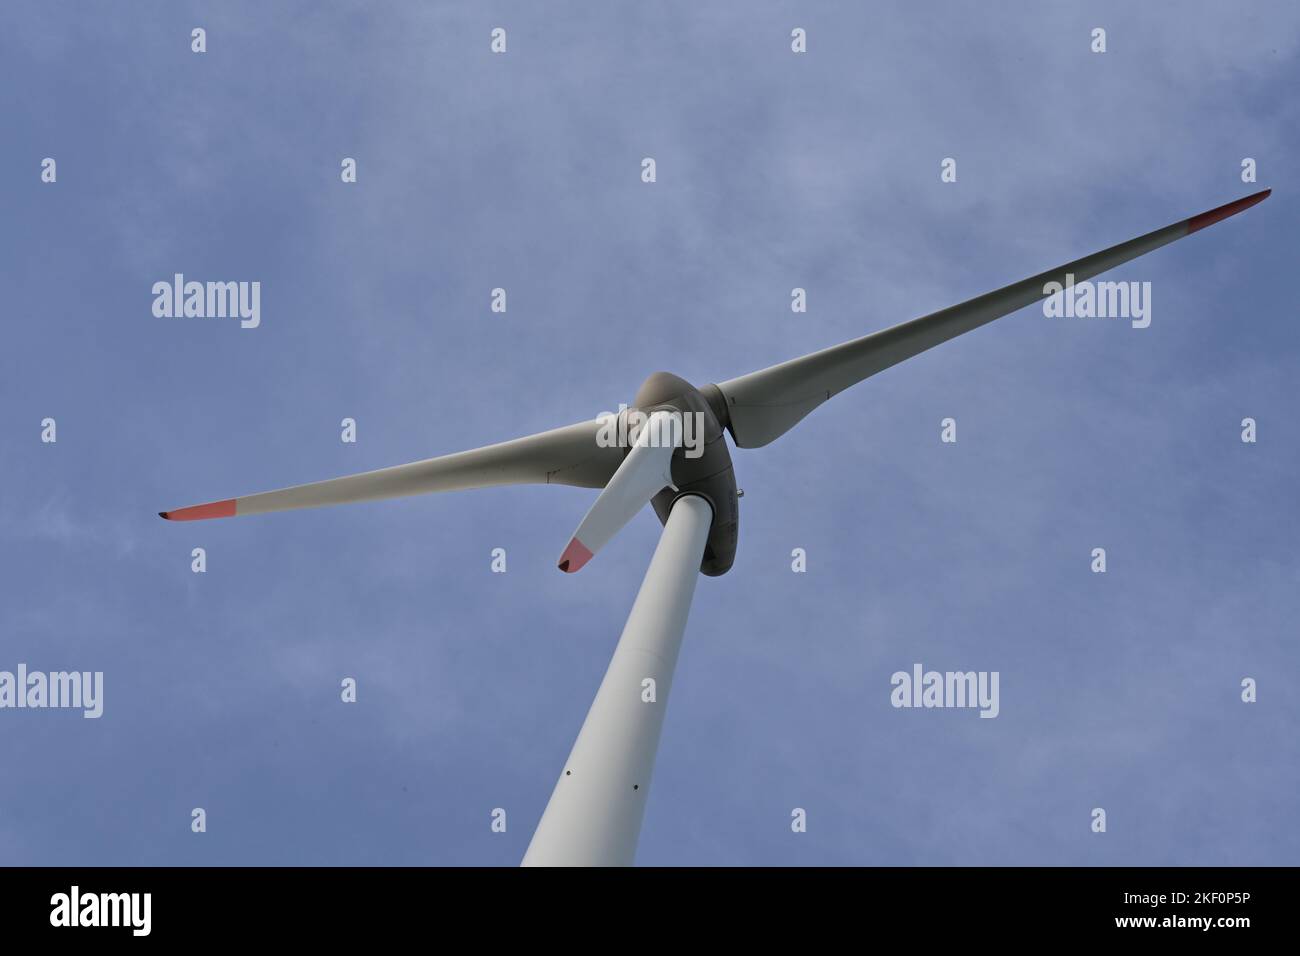 Detail view on propeller of on-shore wind turbine against blue sky supplying with renewable energy the needs of inhabitants. Stock Photo